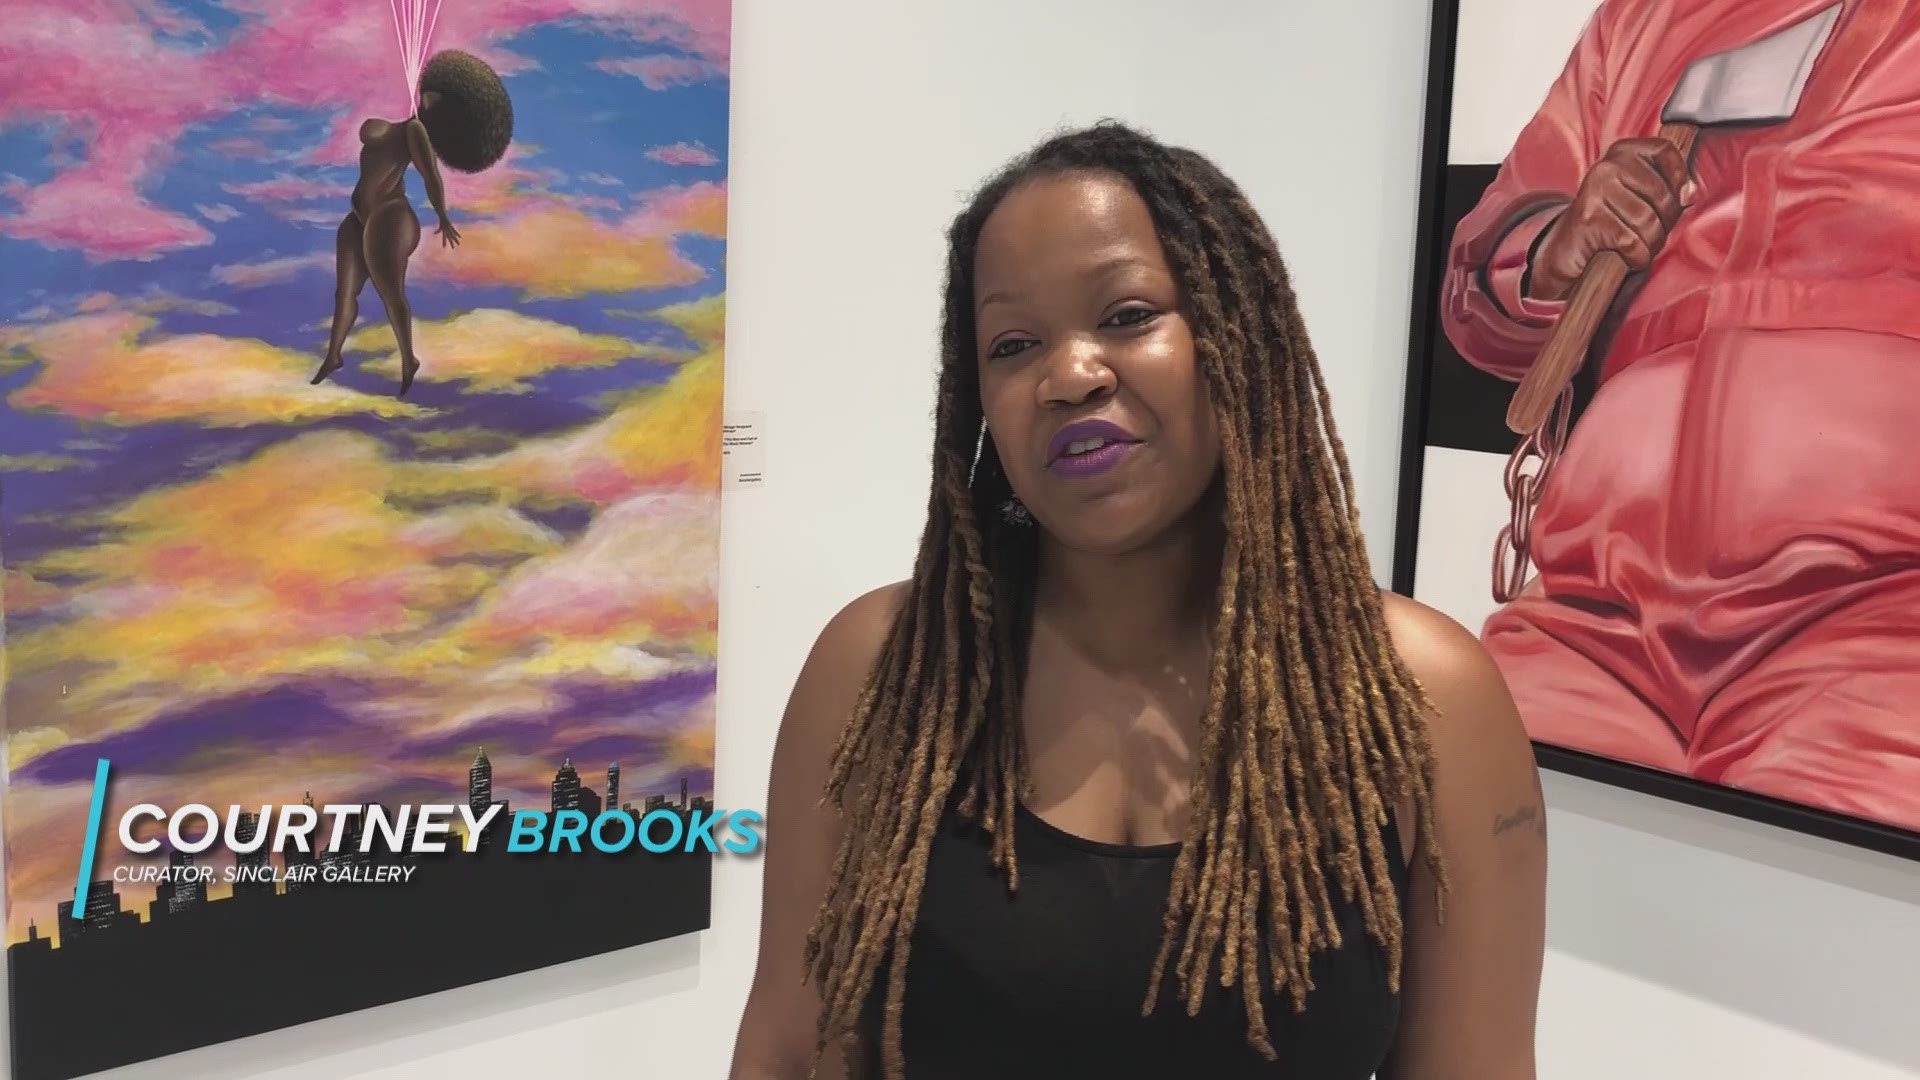 Portraits of popular Atlanta hip hop artists such as Andre 3000, Killer Mike and others are some of the visitors' favorites said curator Courtney Brooks.